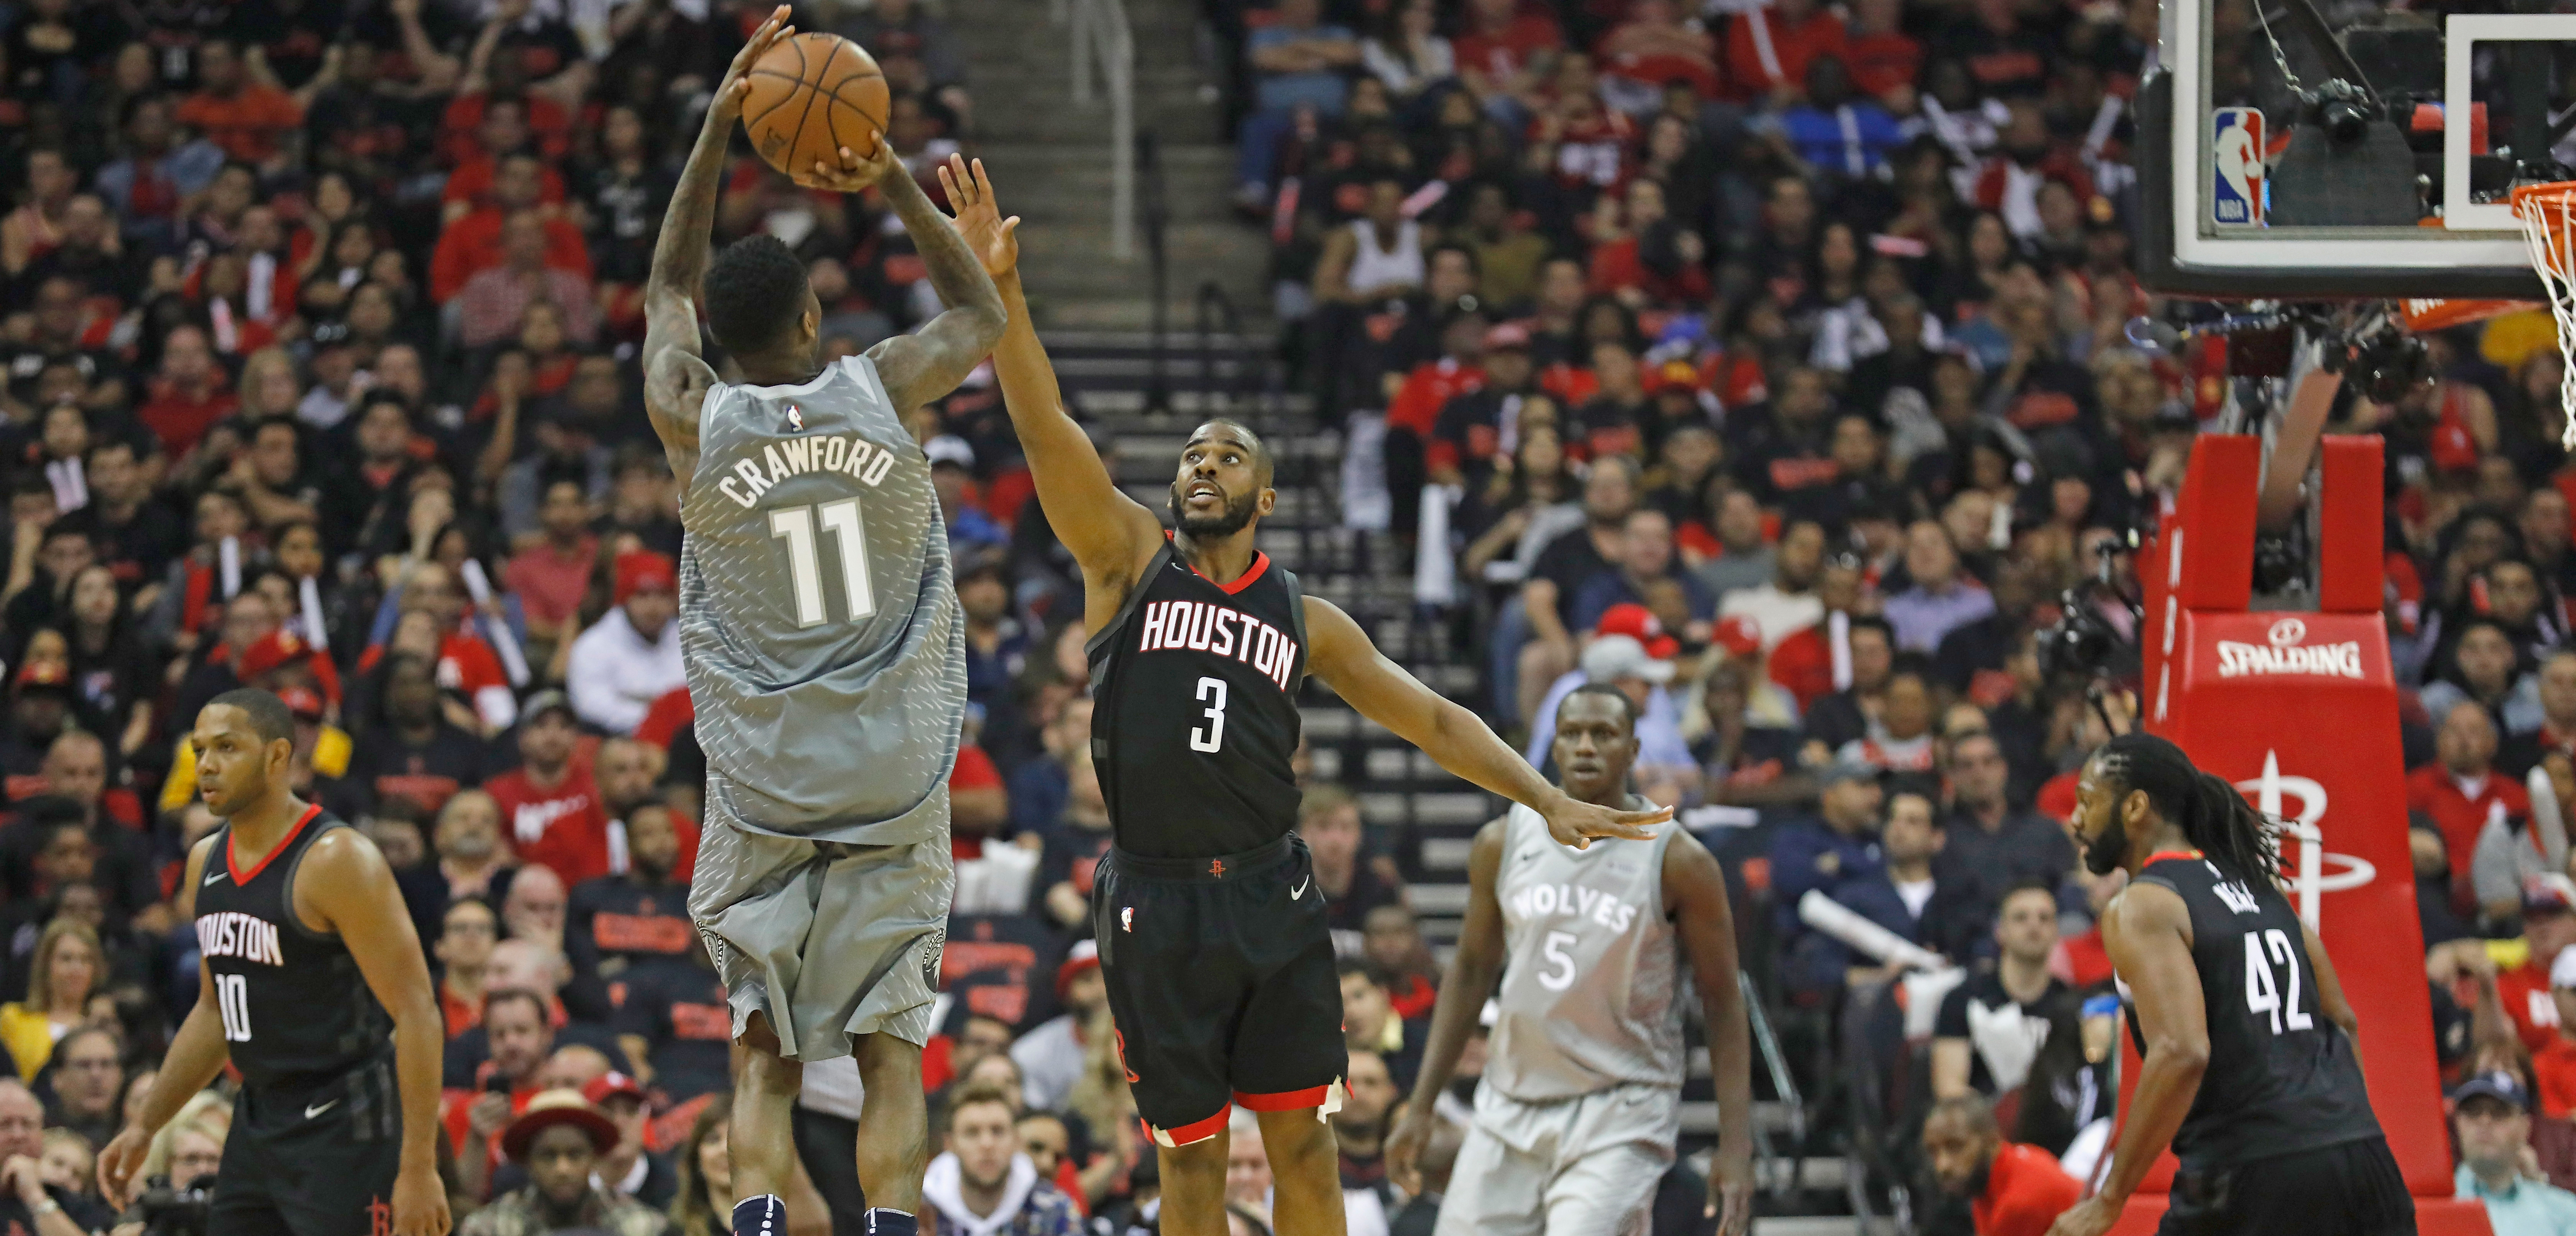 Wolves Come Up Just Short In Game 1 Vs. Rockets | Minnesota Timberwolves